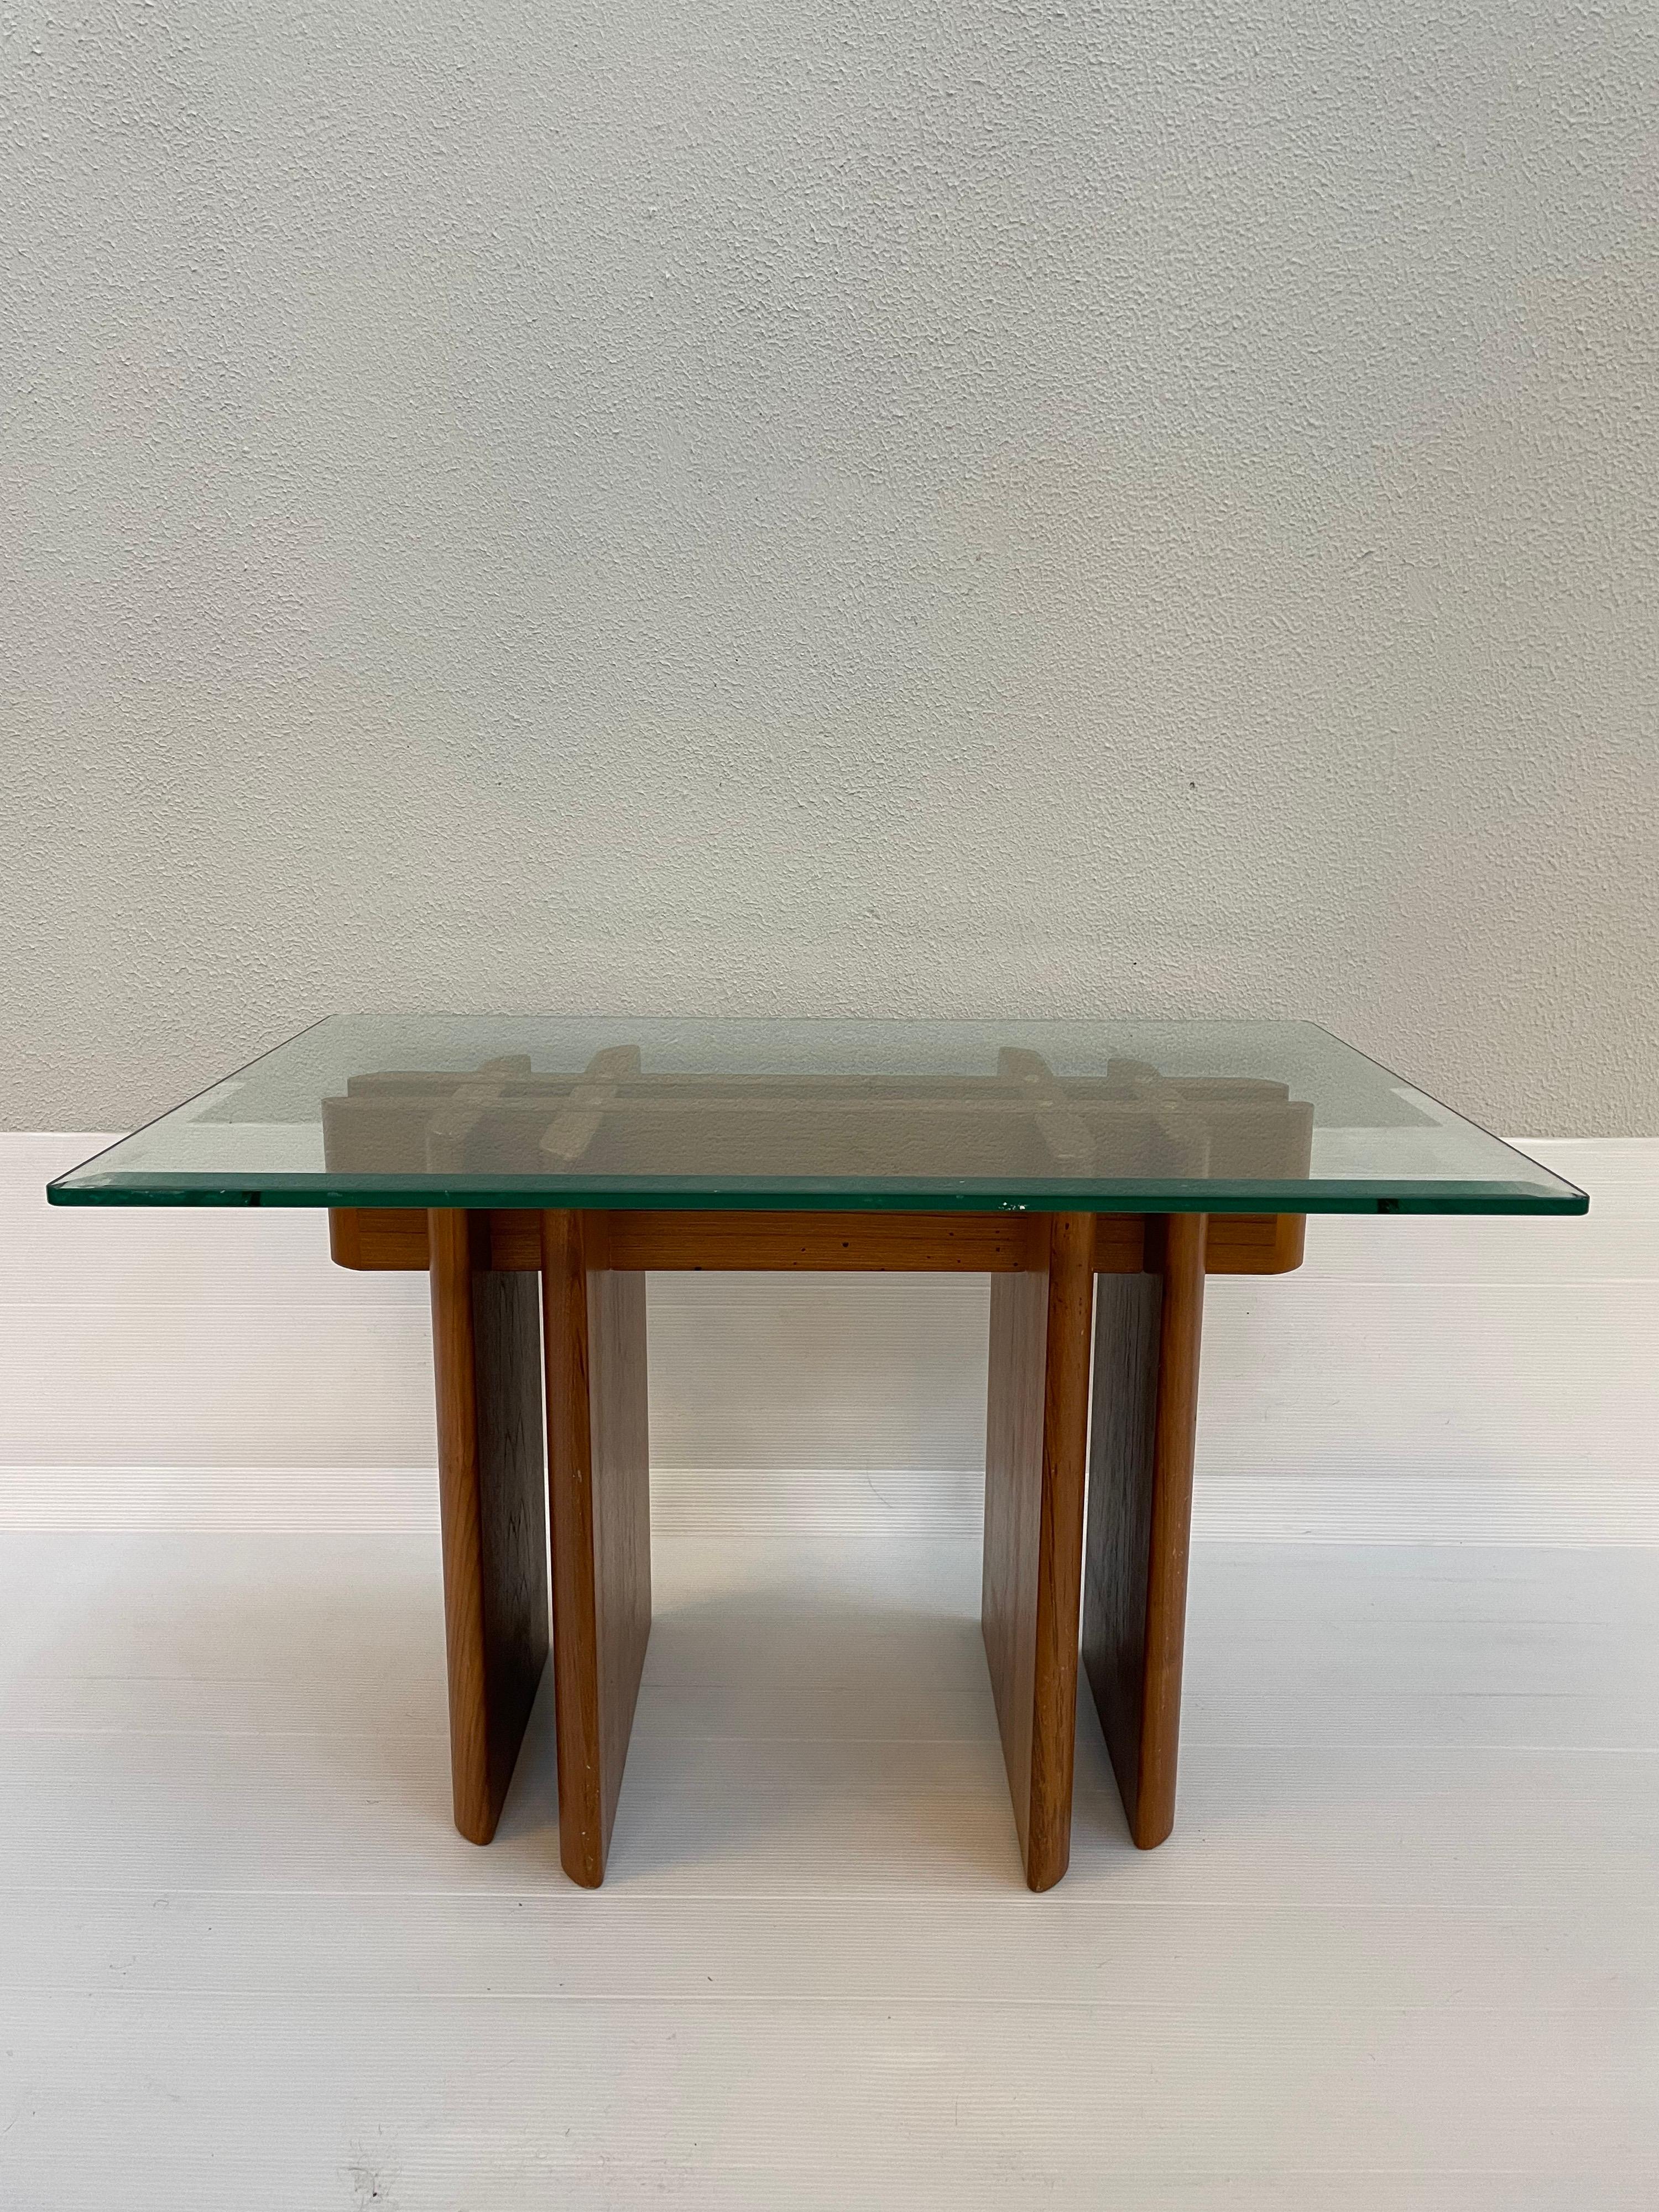 Vintage 1970s teak table by Gustav Gaarde for trekanten of Denmark. The glass top which has a 3/8 inch bevel, rests on an interlaced teak base. 1 out of 2 pieces of a set listed.